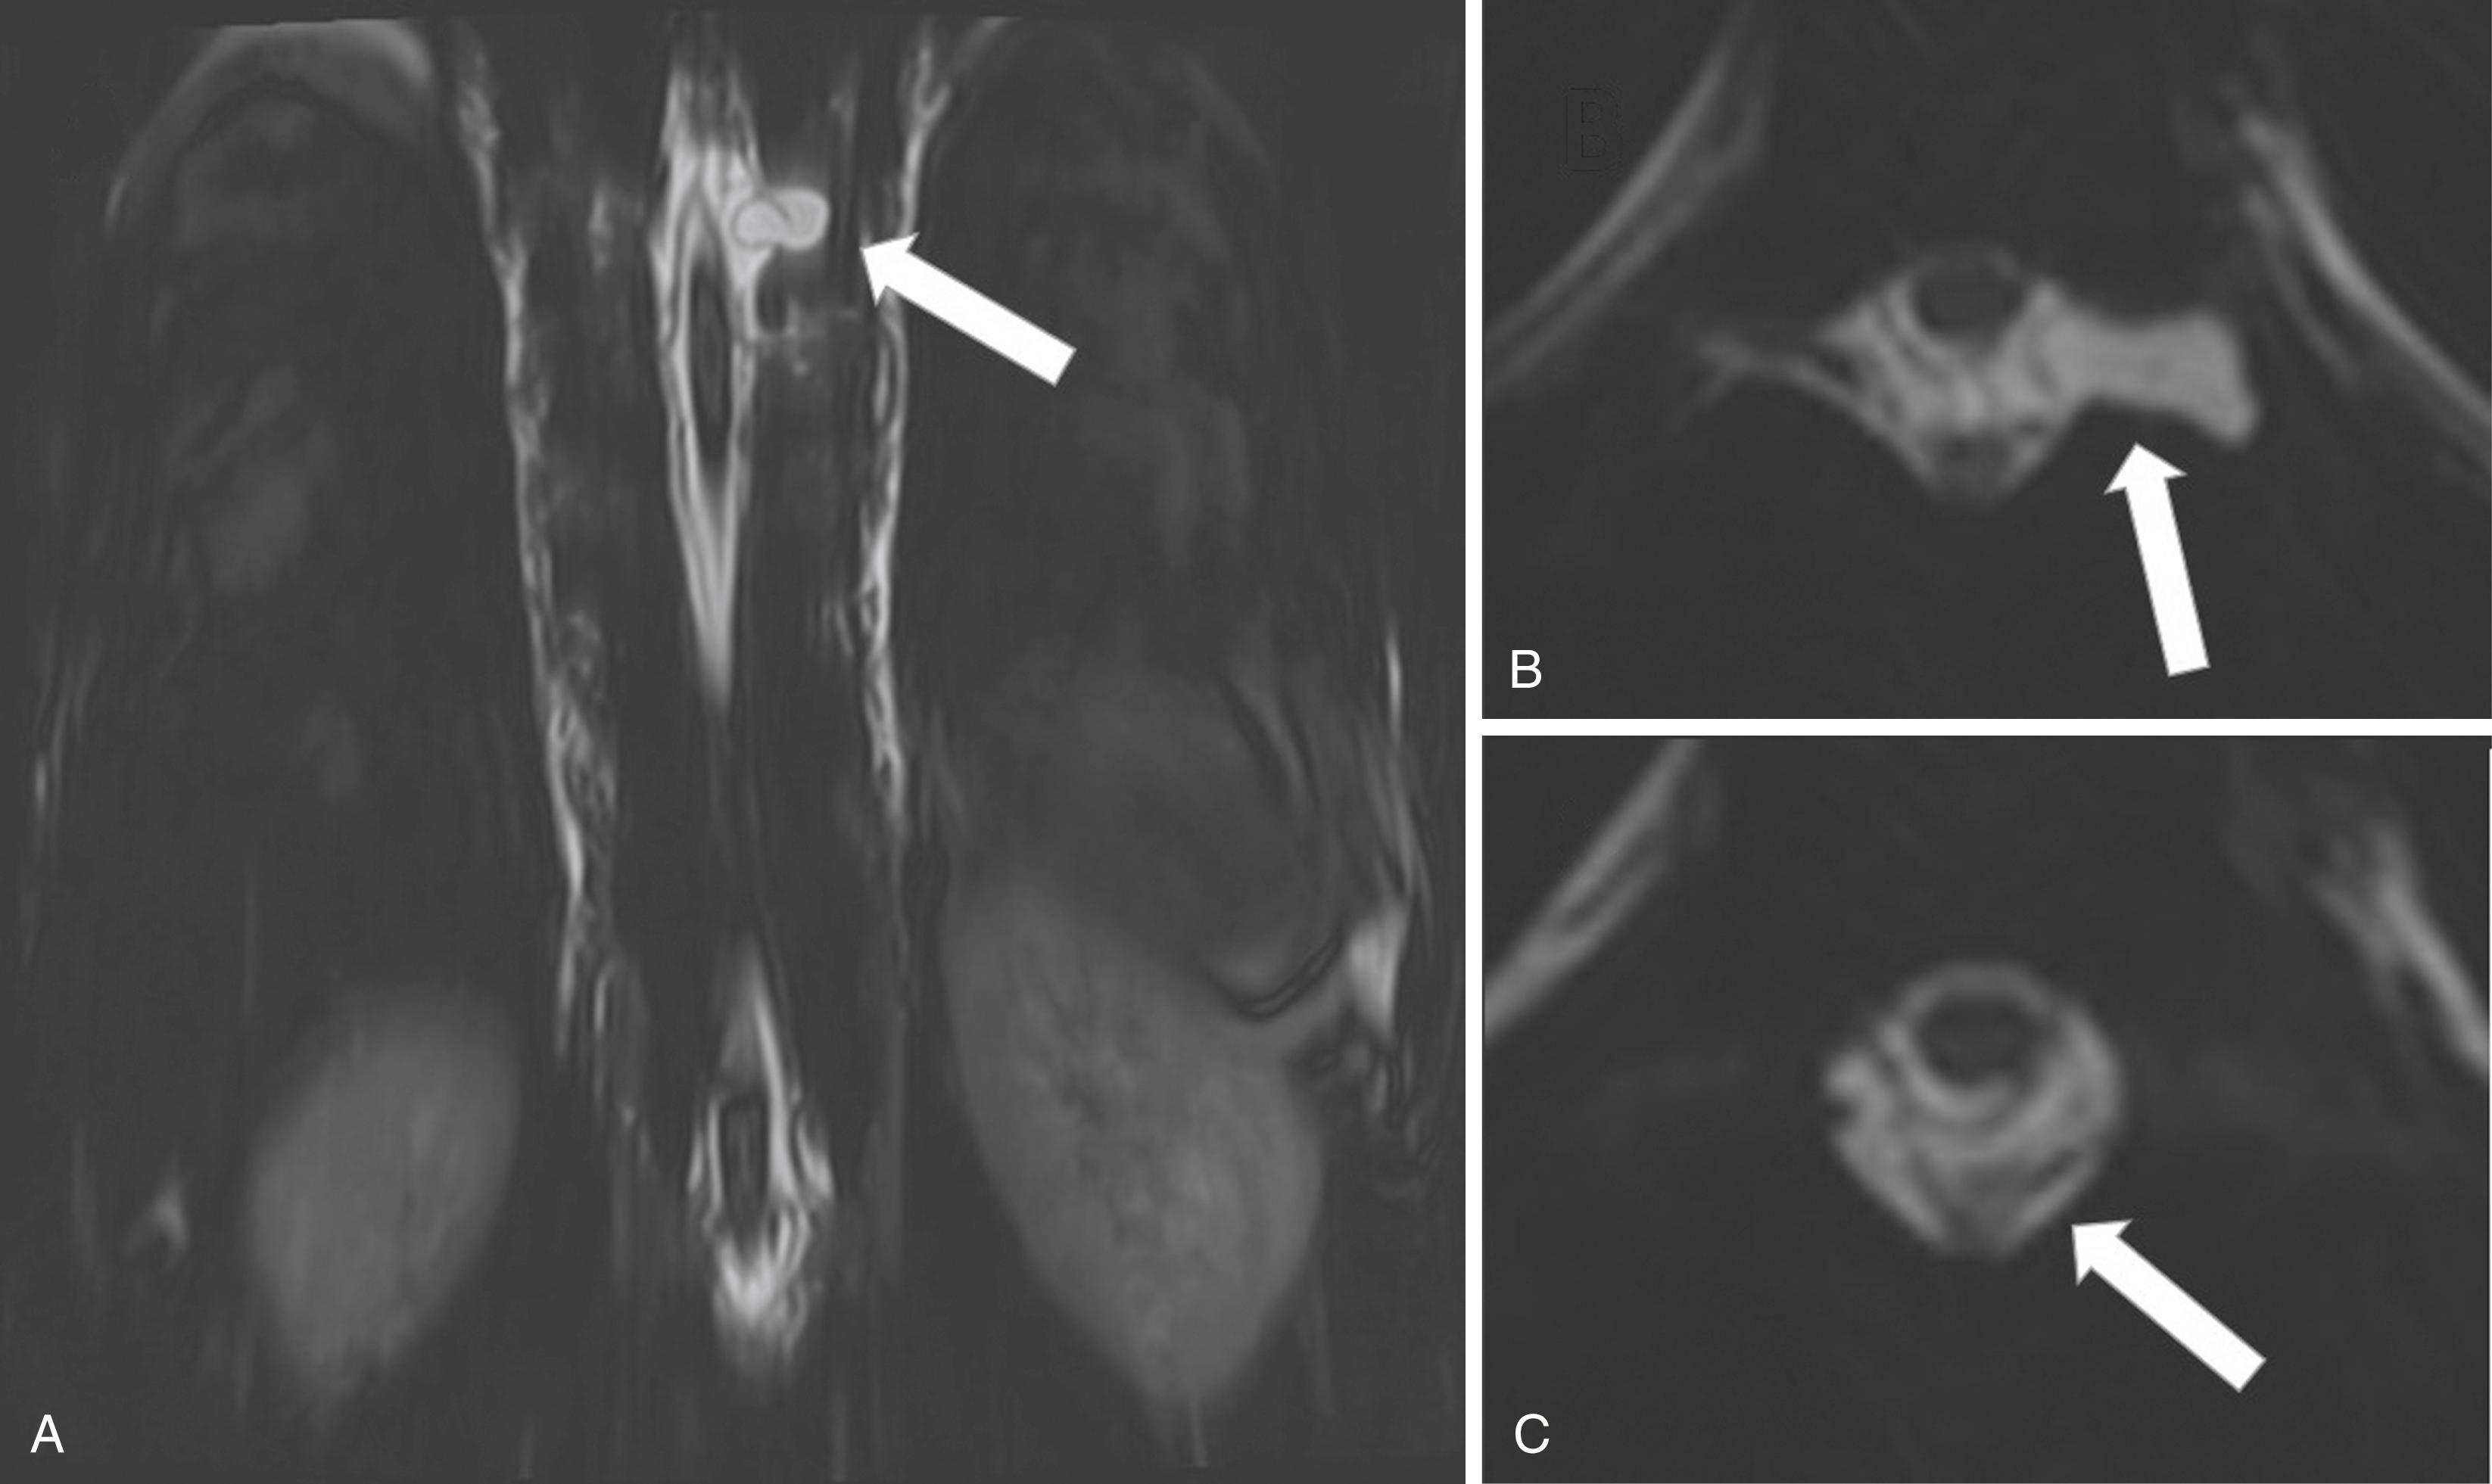 Figure 11.8, Coronal (A) and axial (B) images from high-resolution T2-weighted MR myelography demonstrates a large perineural cyst that has spontaneously ruptured. The axial images (C) demonstrate a large dorsal subdural collection that has resulted from the cerebrospinal fluid leak.